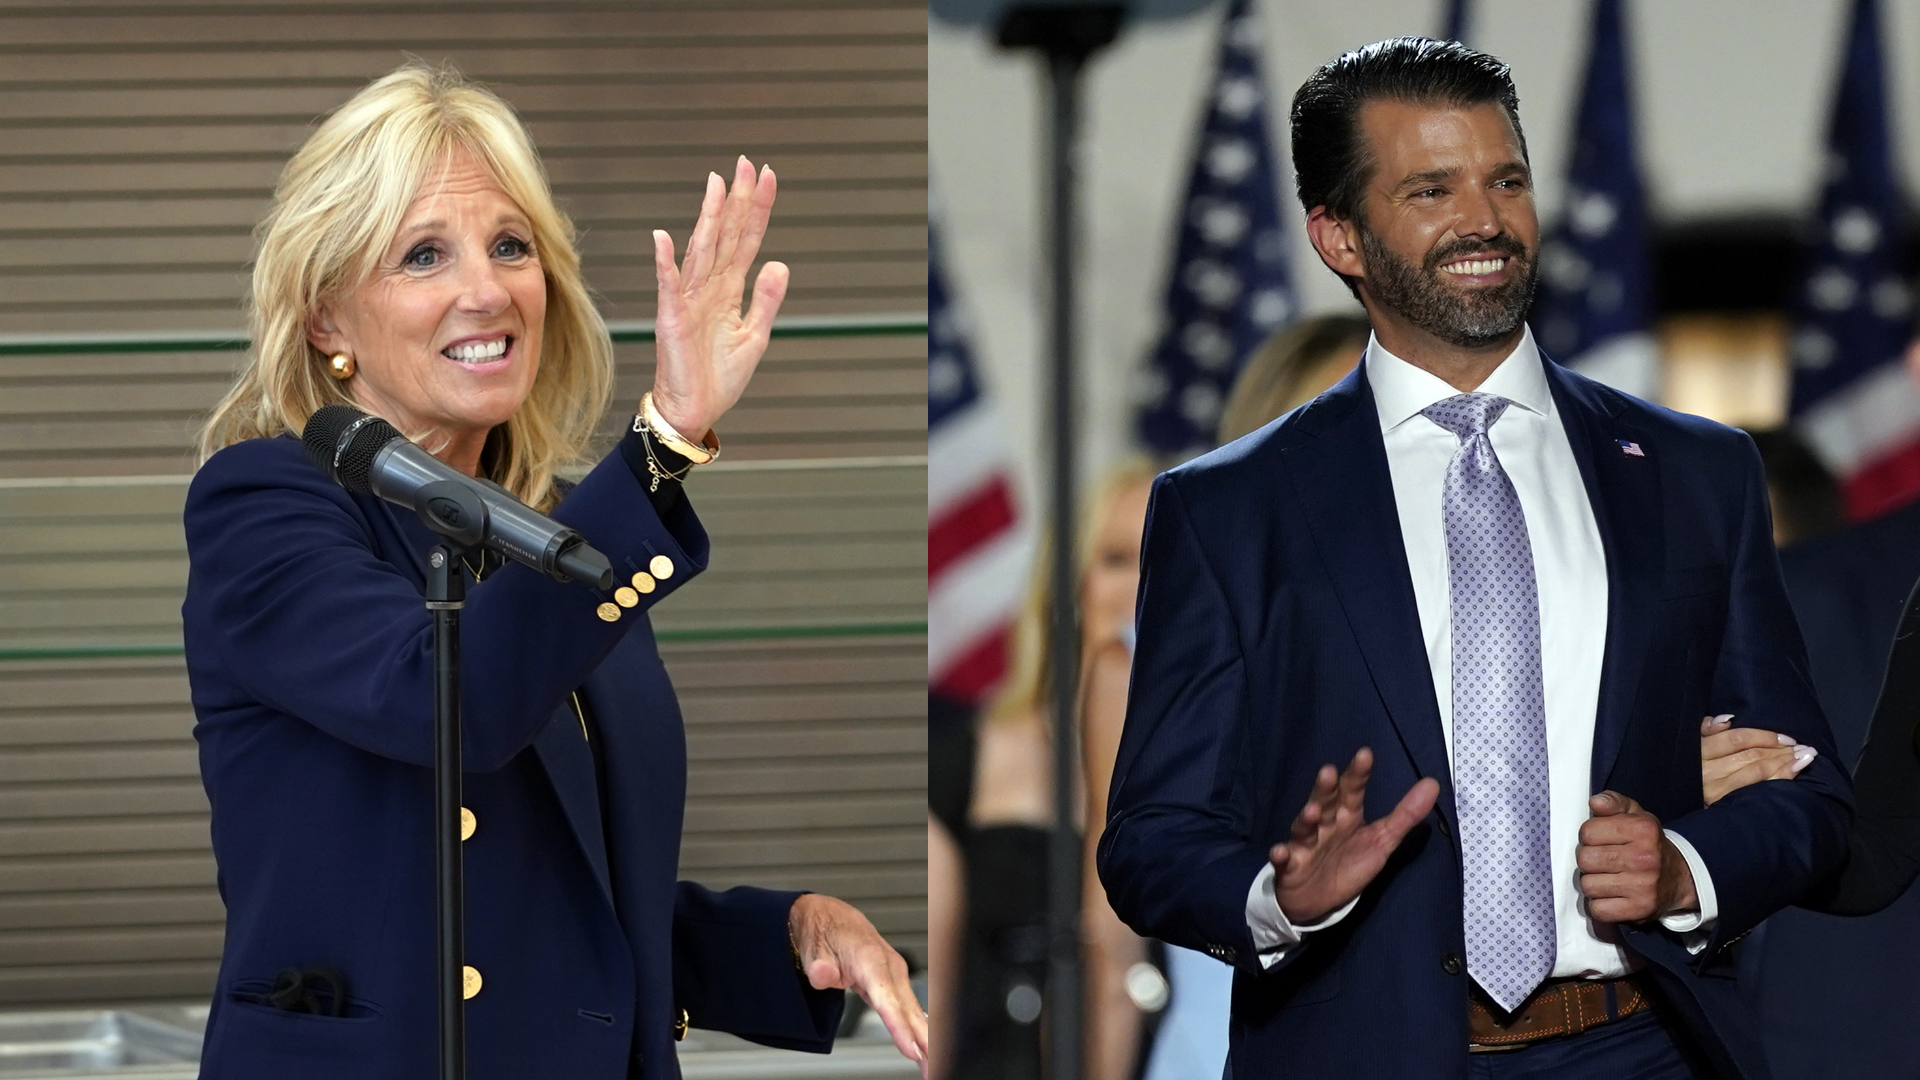 Jill Biden and Donald Trump, Jr. were both scheduled to make campaign stops in the state on Wednesday.